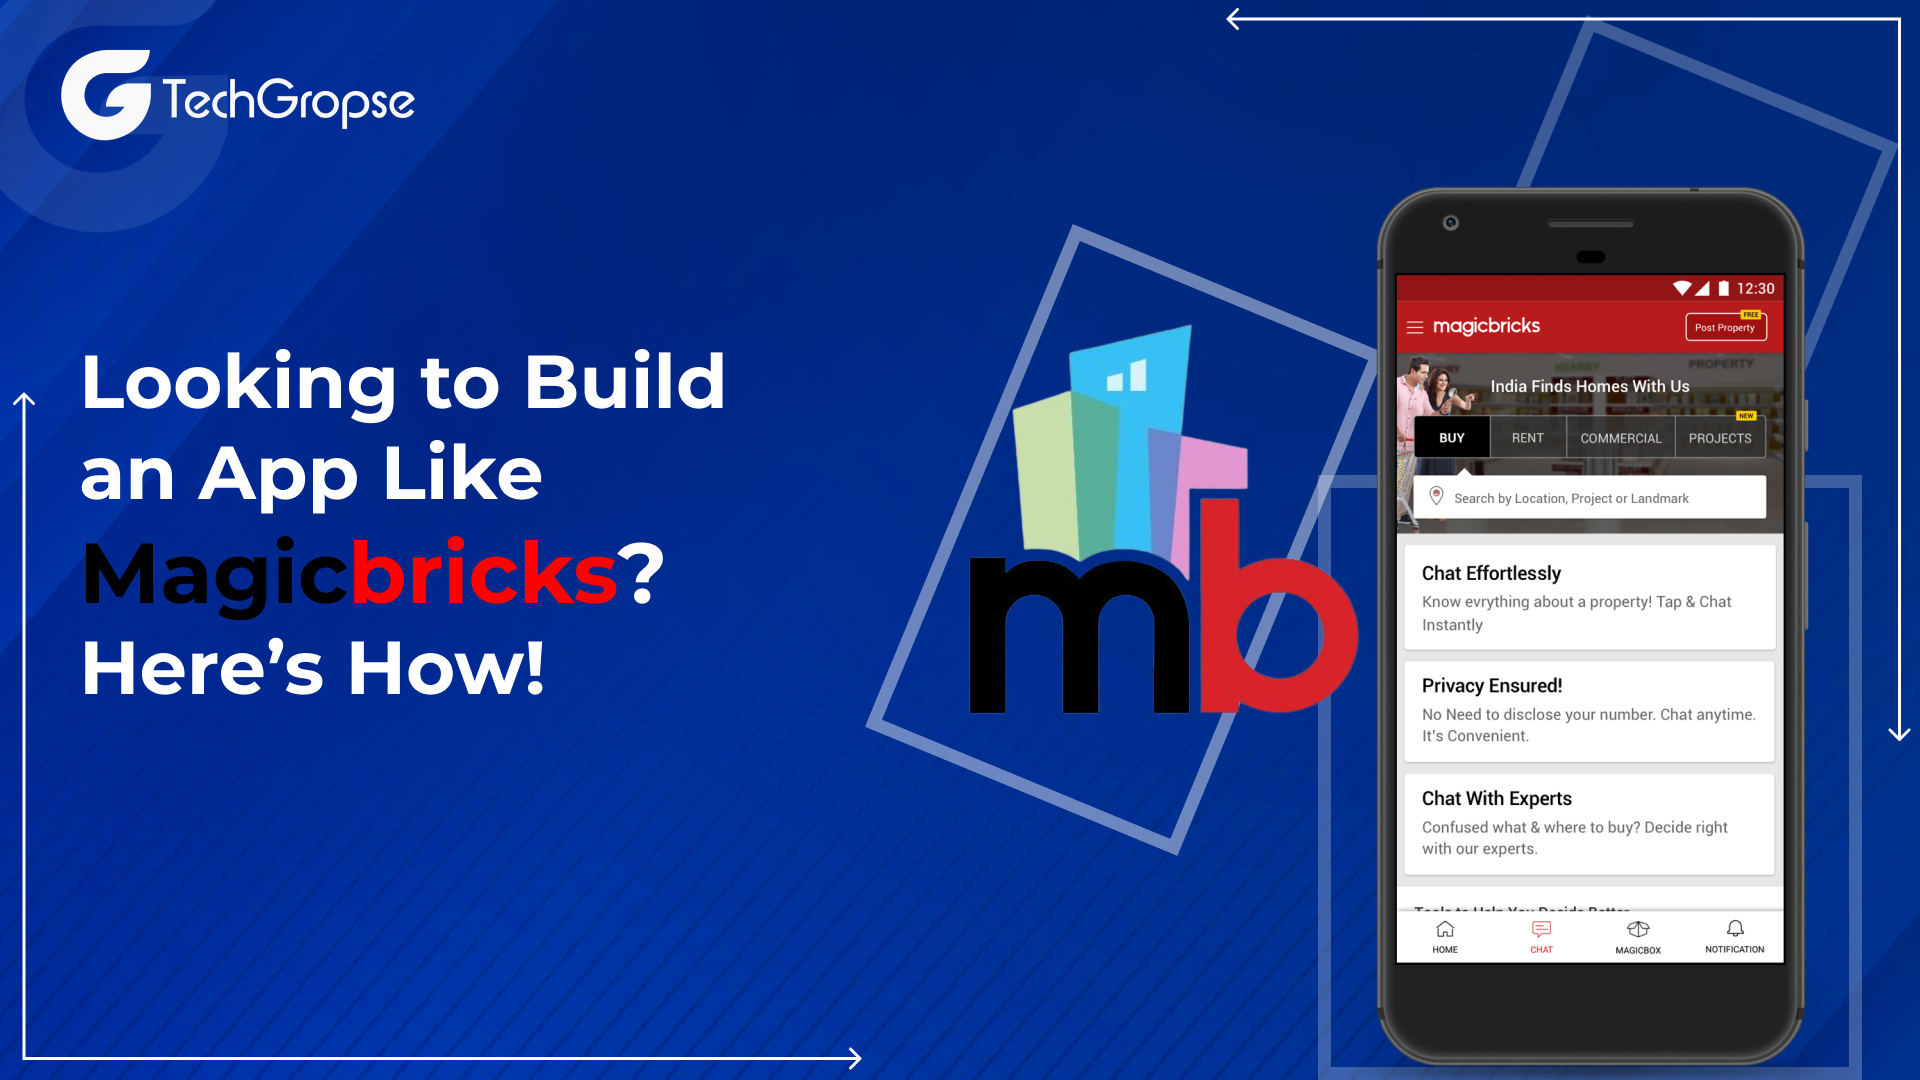 Looking to Build an App Like Magicbricks? Here's How!